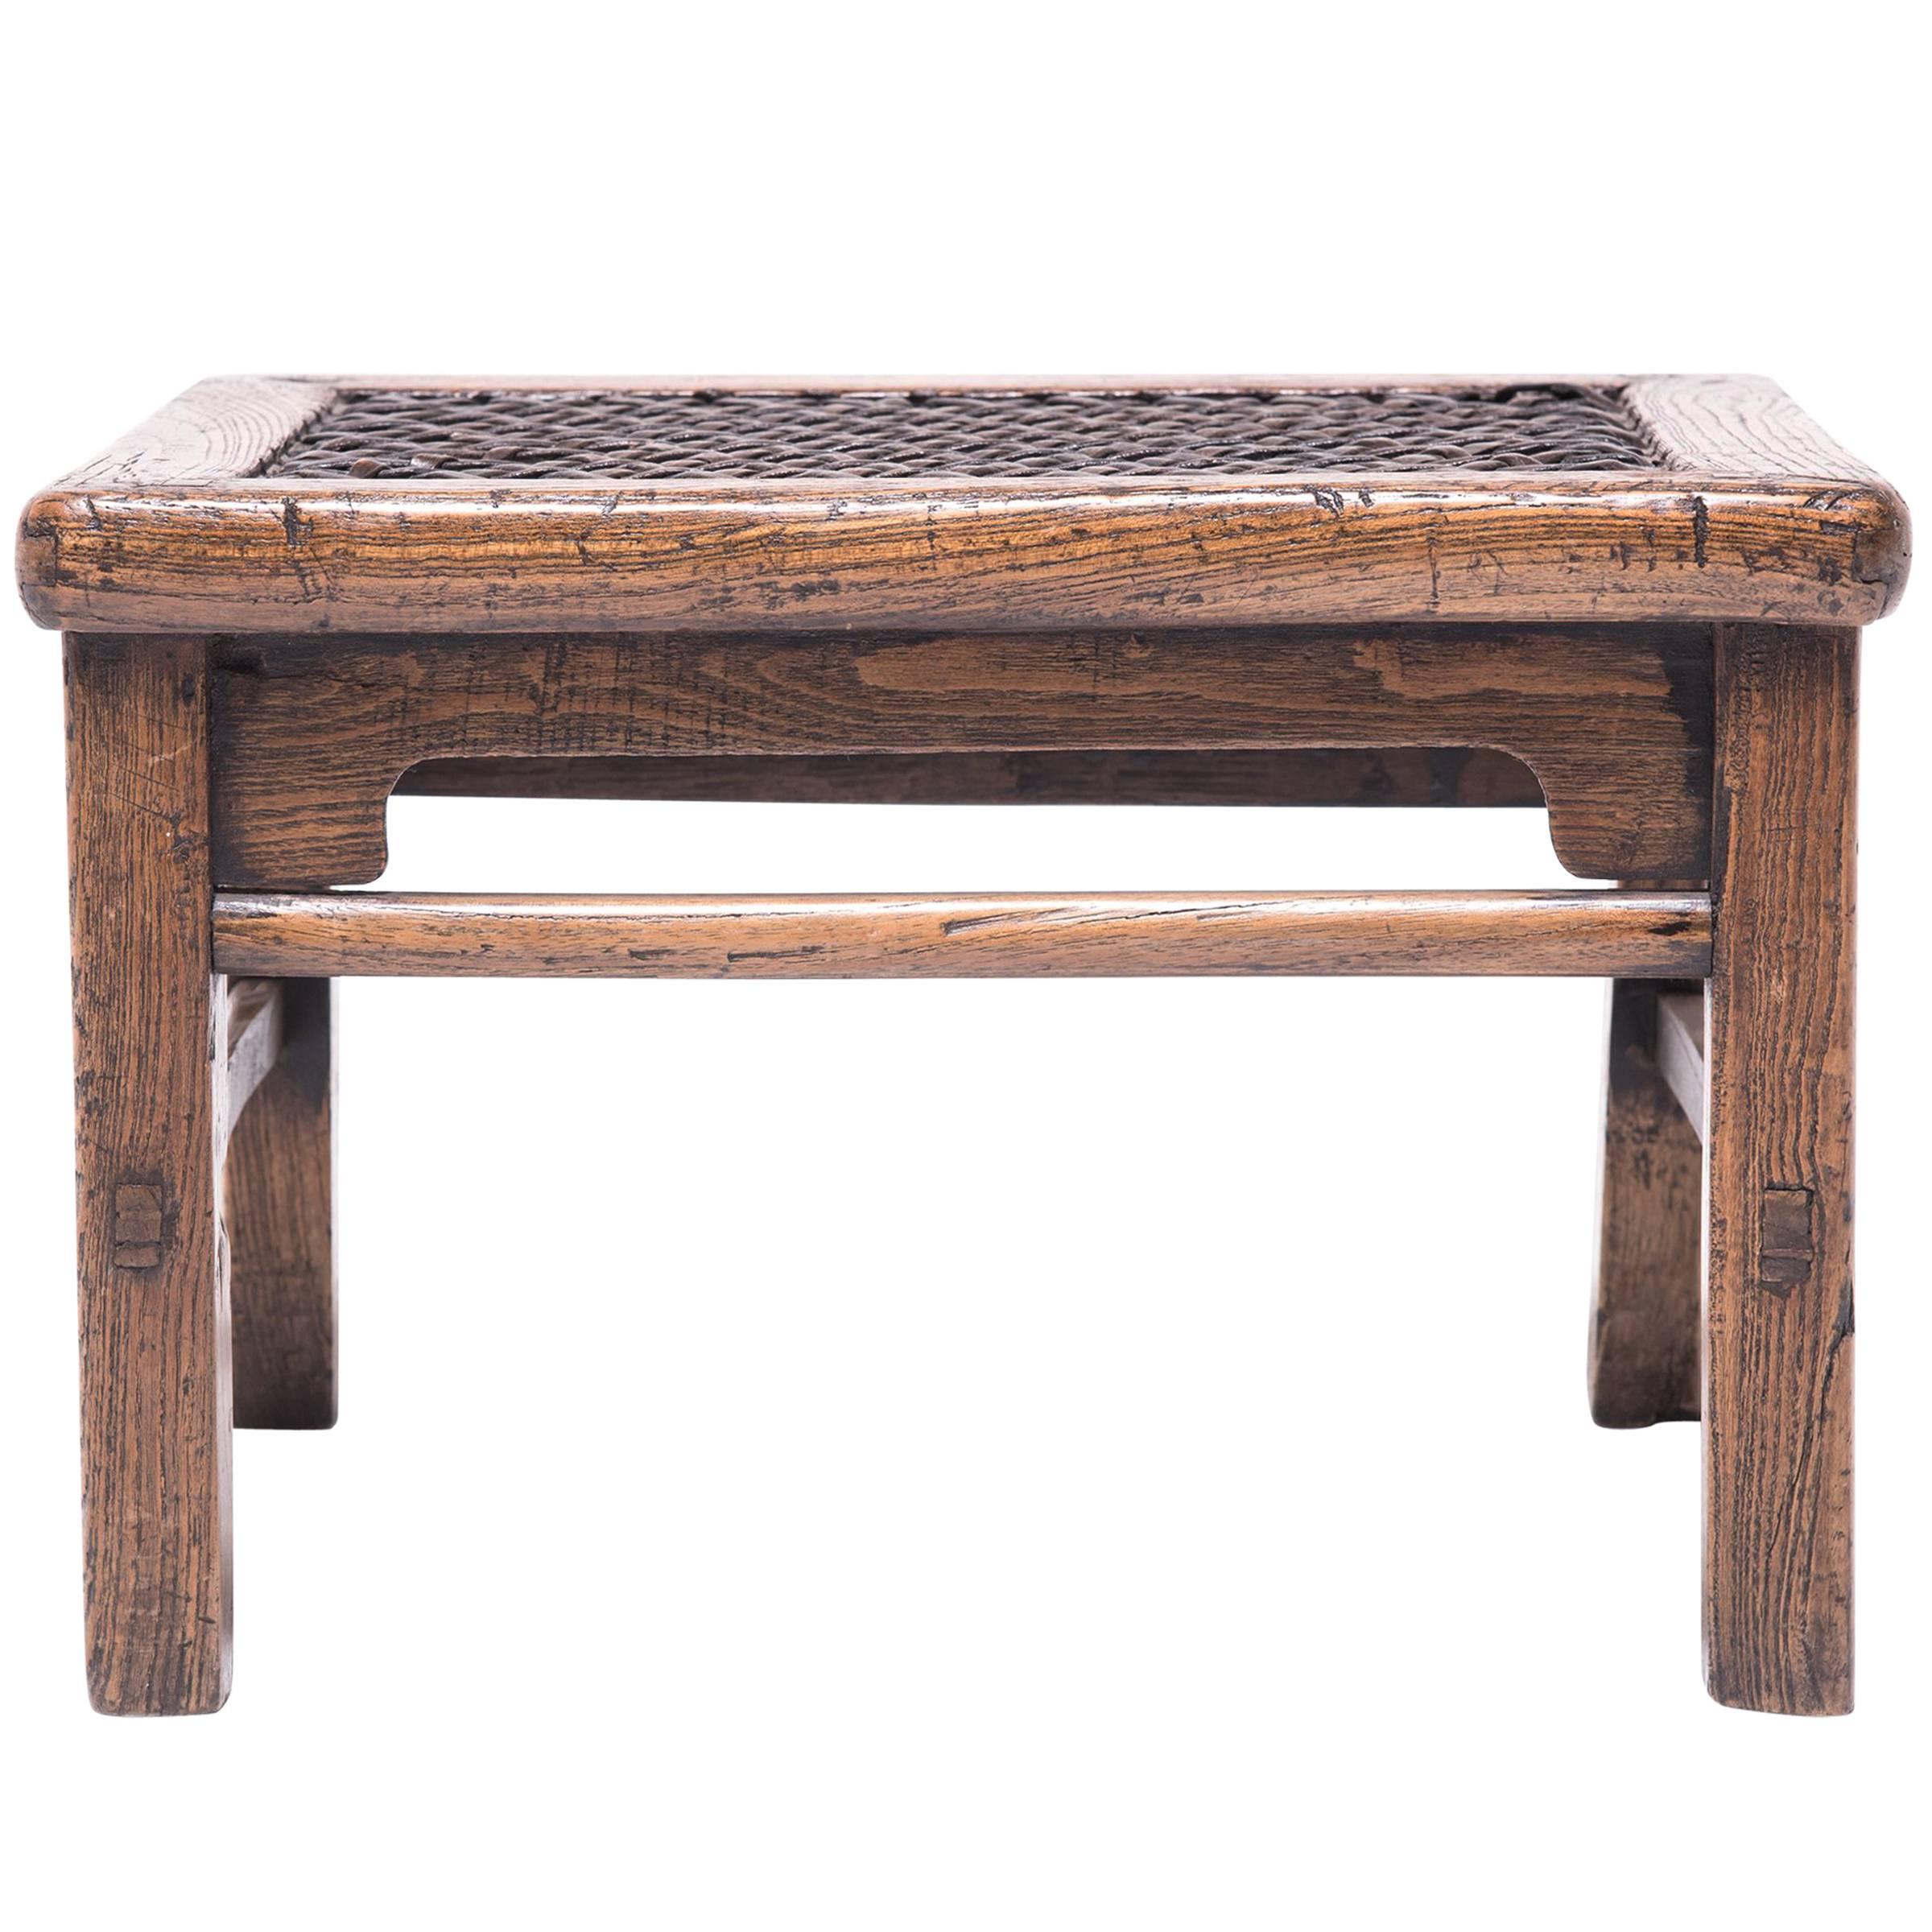 19th Century Chinese Low Stool with Woven Hide Top